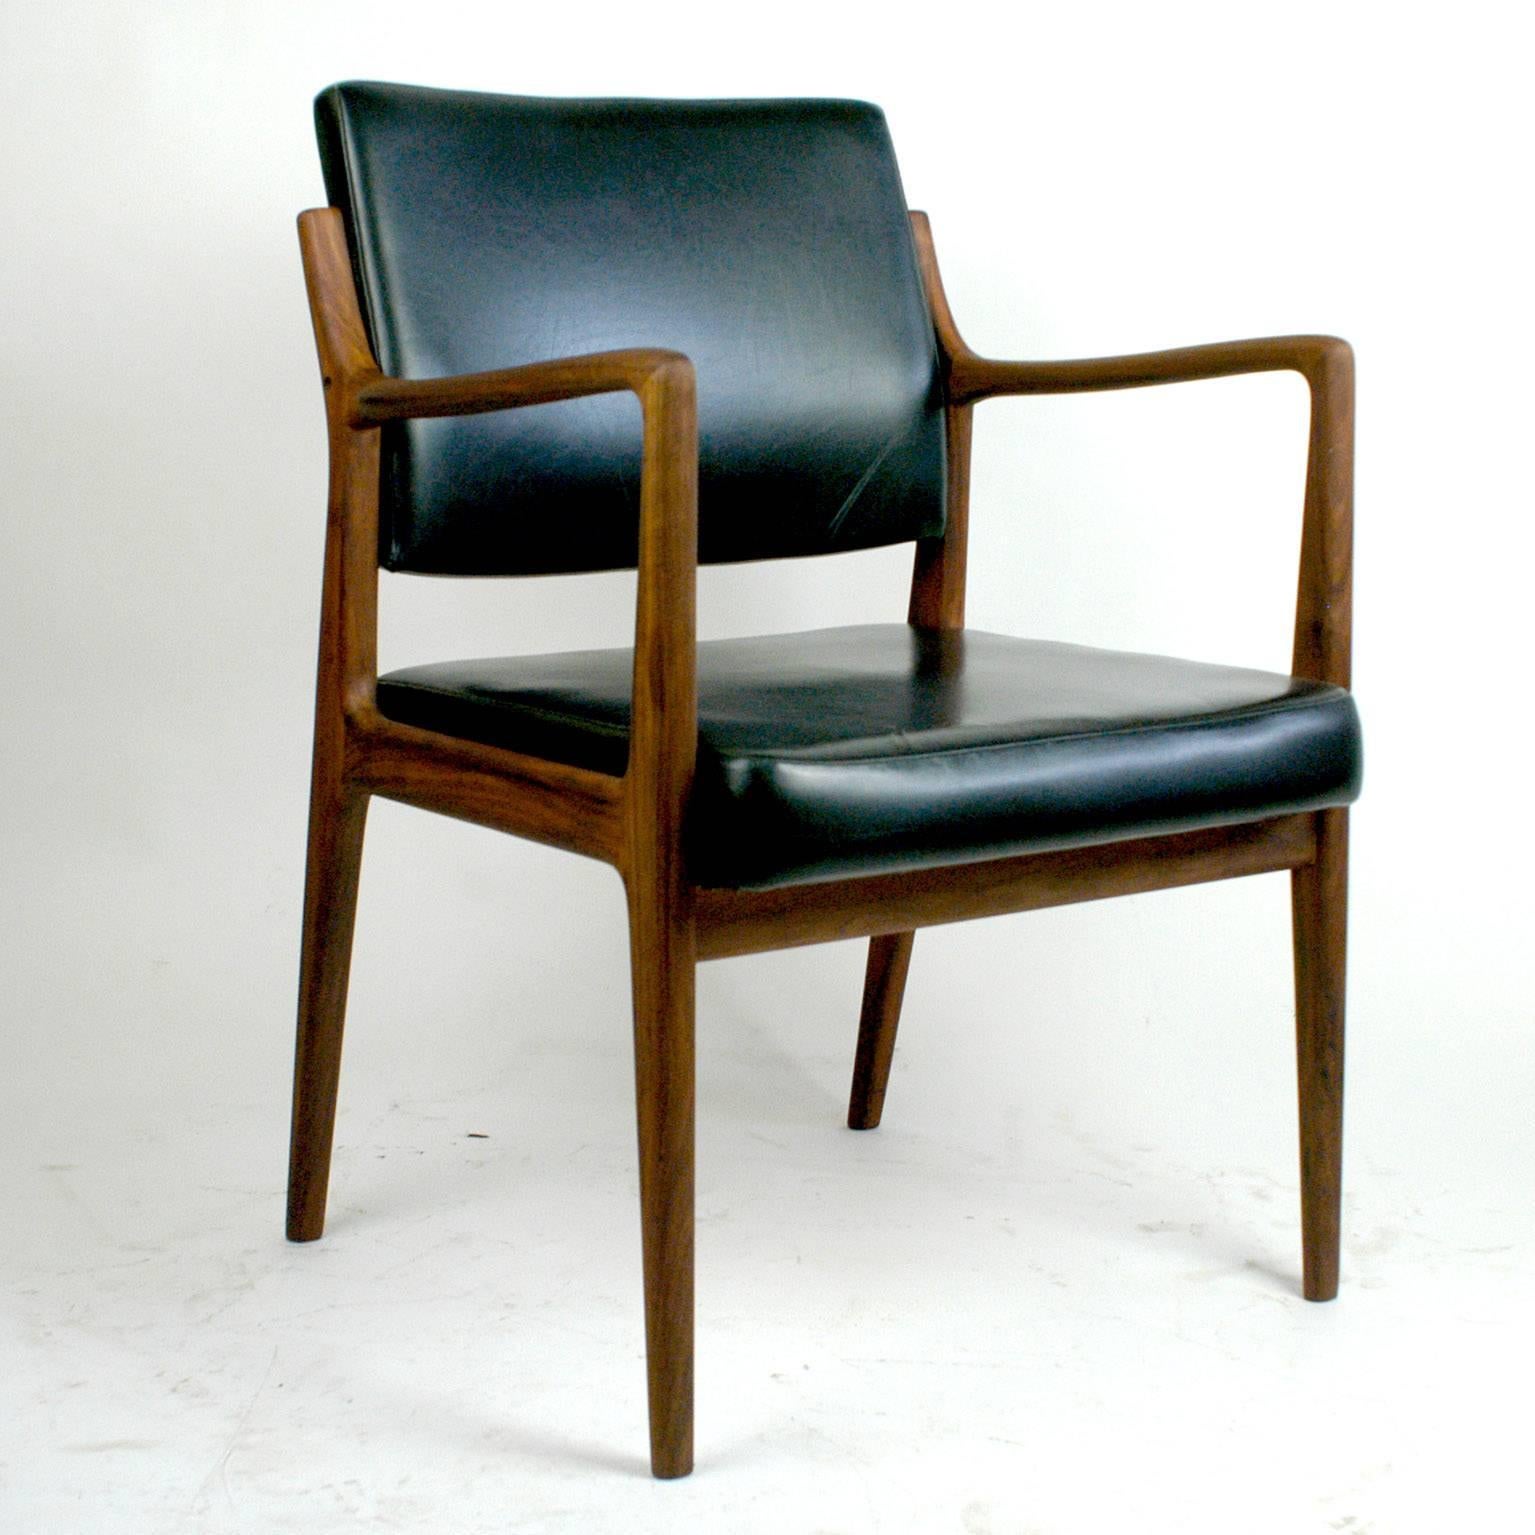 This perfect Scandinavian modern armchair features a teak wood frame and a seat - and back cushion with black Leatherette. It was designed in the 1960s by Karl Erik Ekselius for JOC Mobler, Vetlanda, Sweden. The manufacturers brandmark is on the